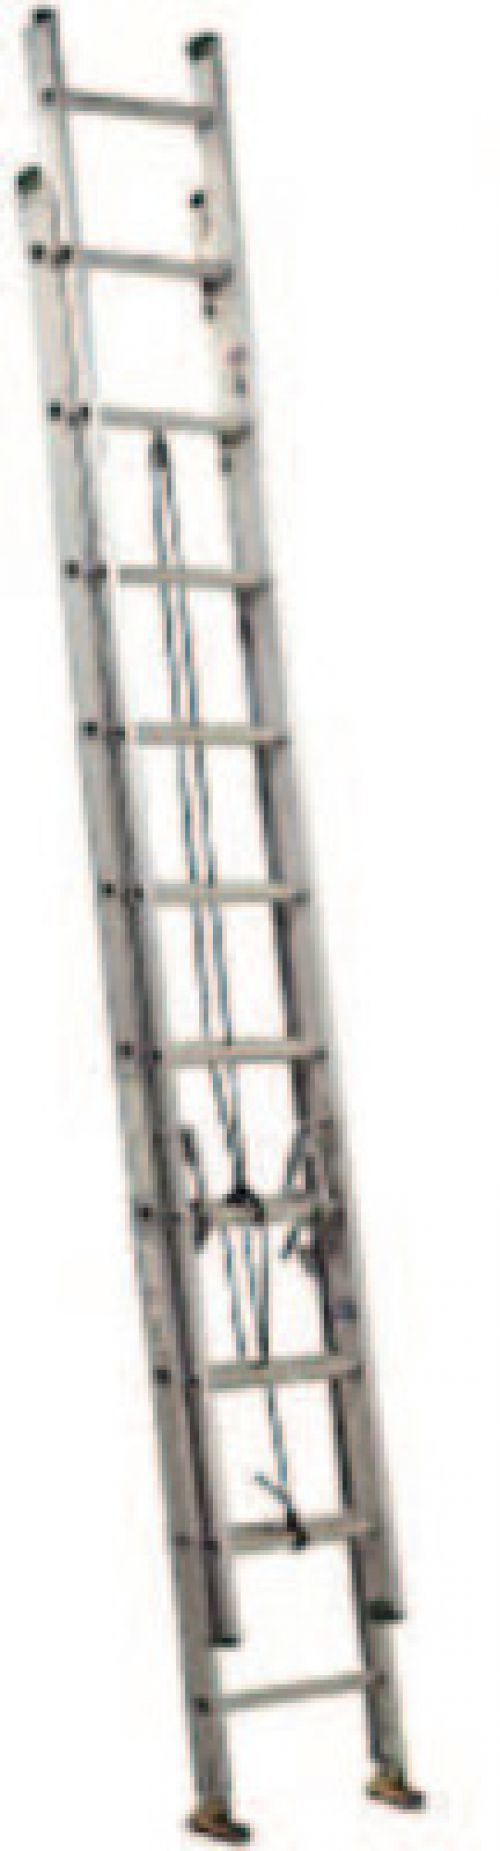 AE4000 Series Commercial Aluminum Extension Ladders, 24 ft, Class II, 225 lb